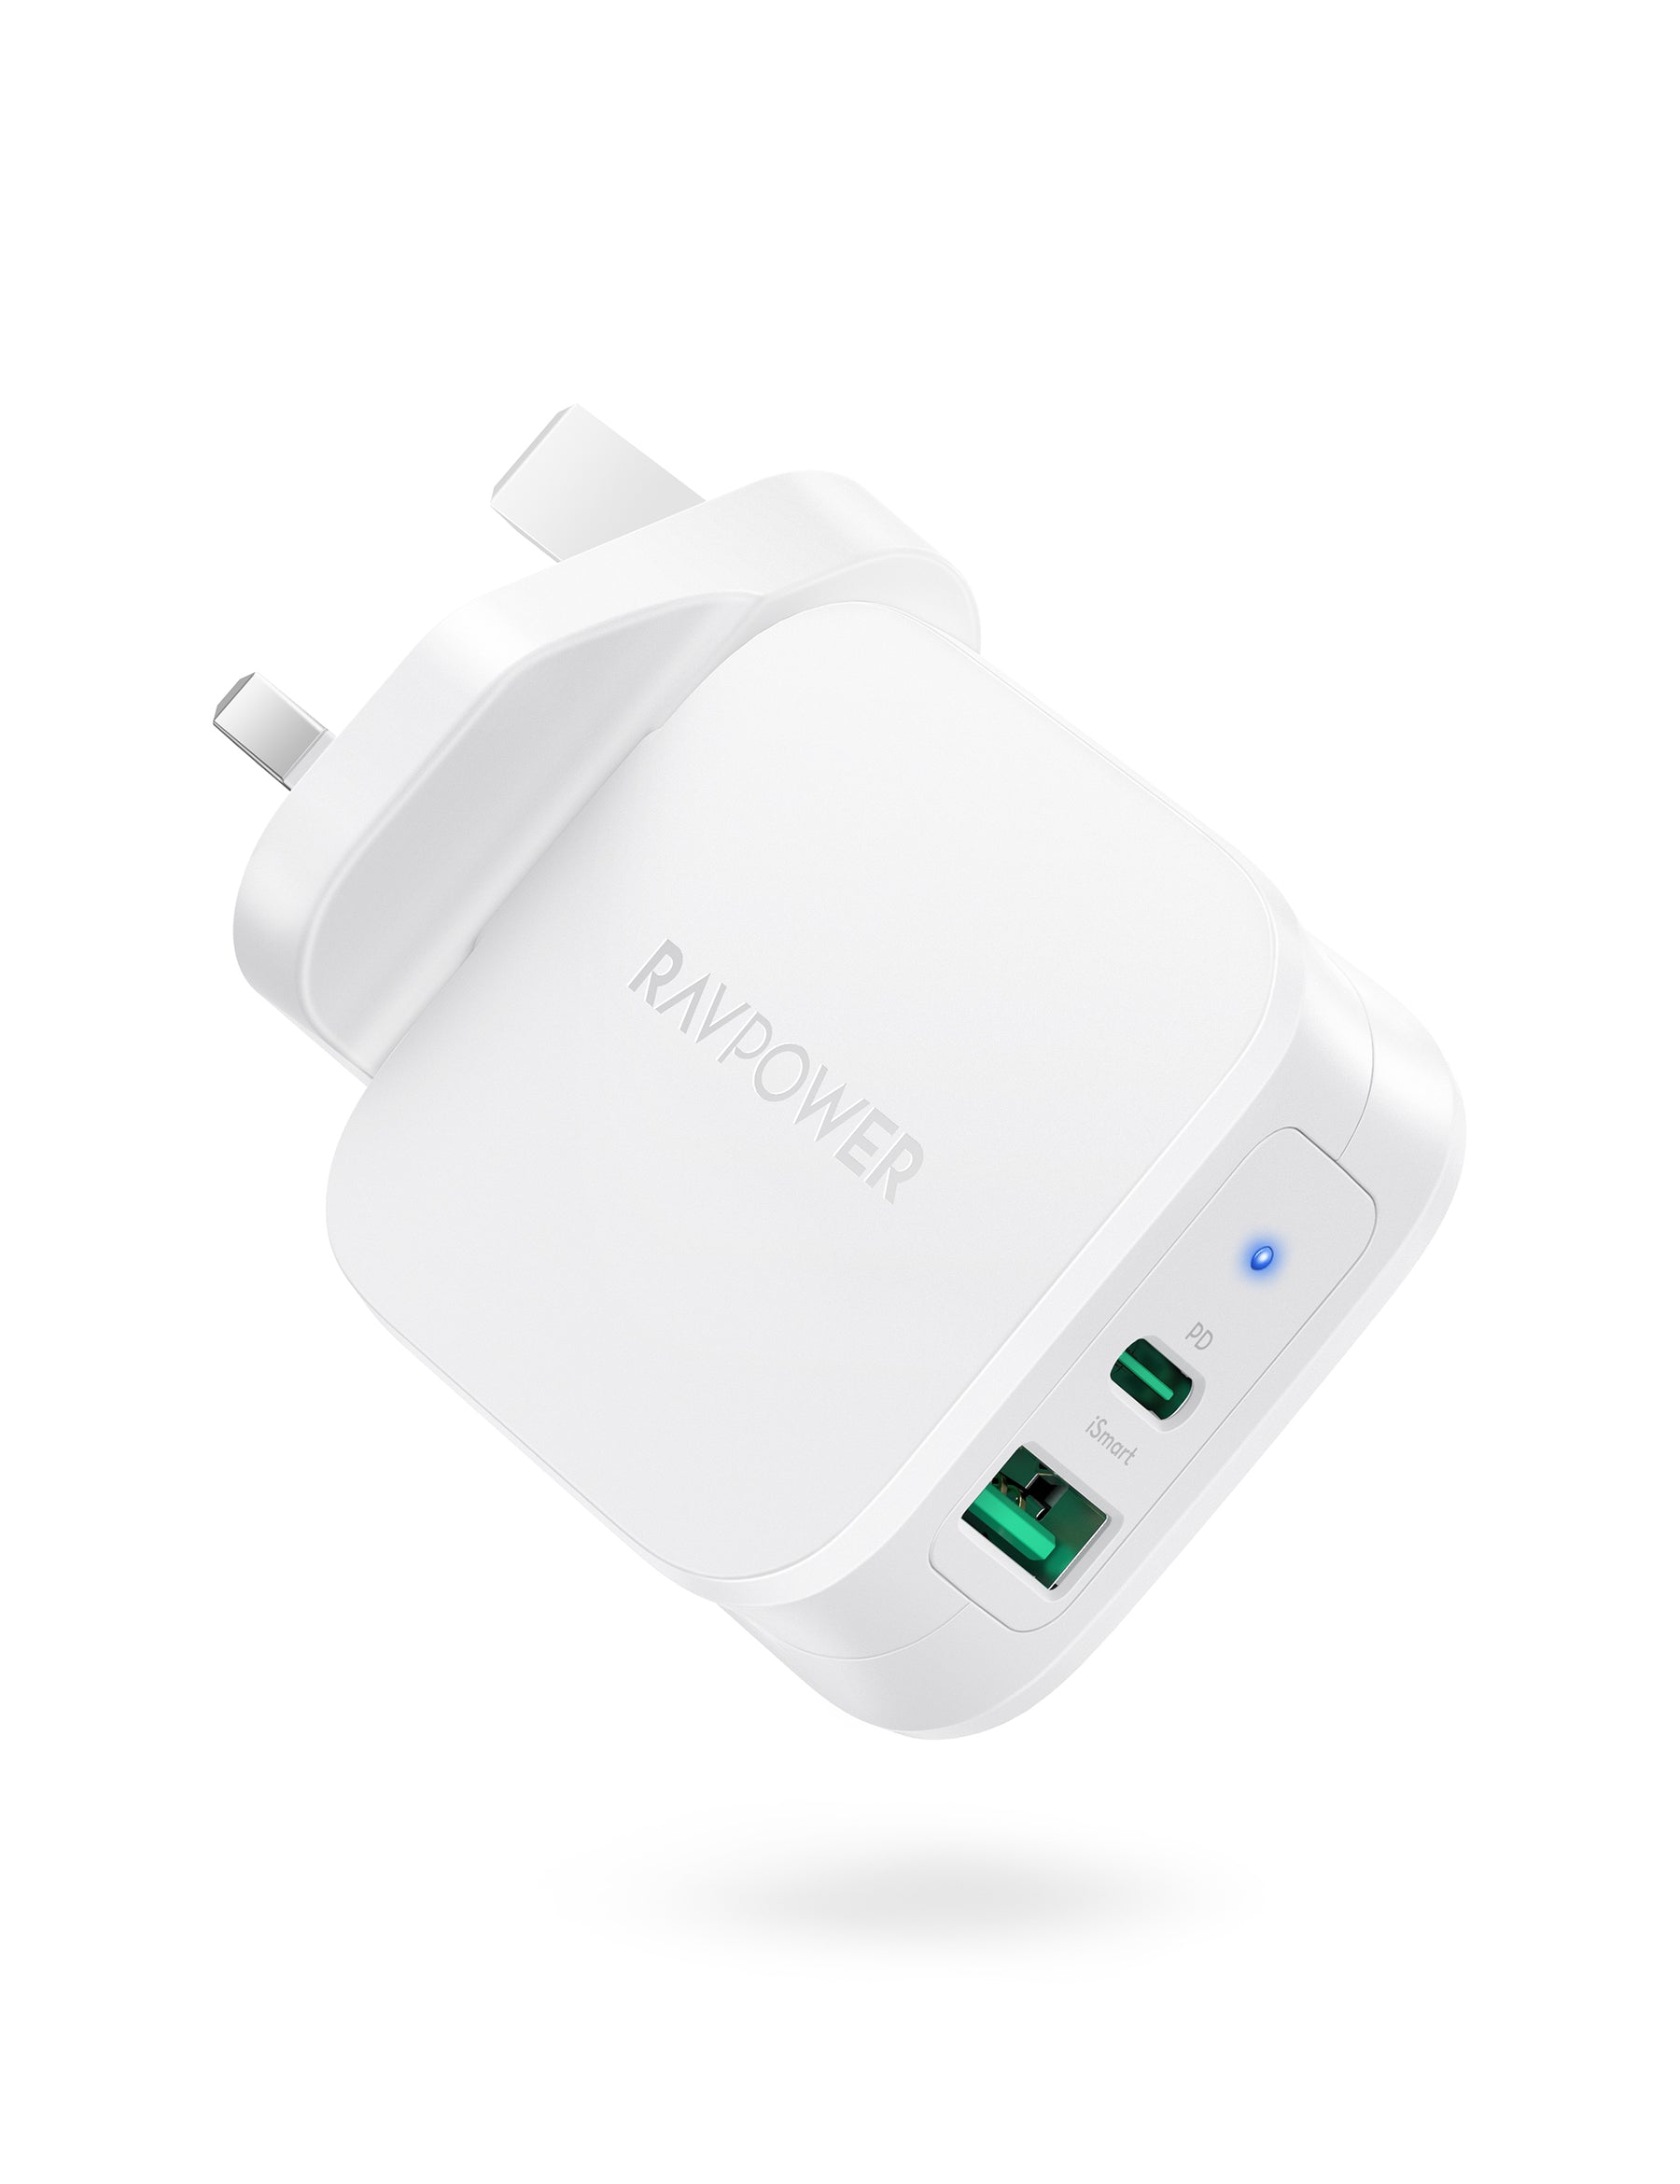 RAVpower PD 30W USB-C Charger with Lightning Cable review